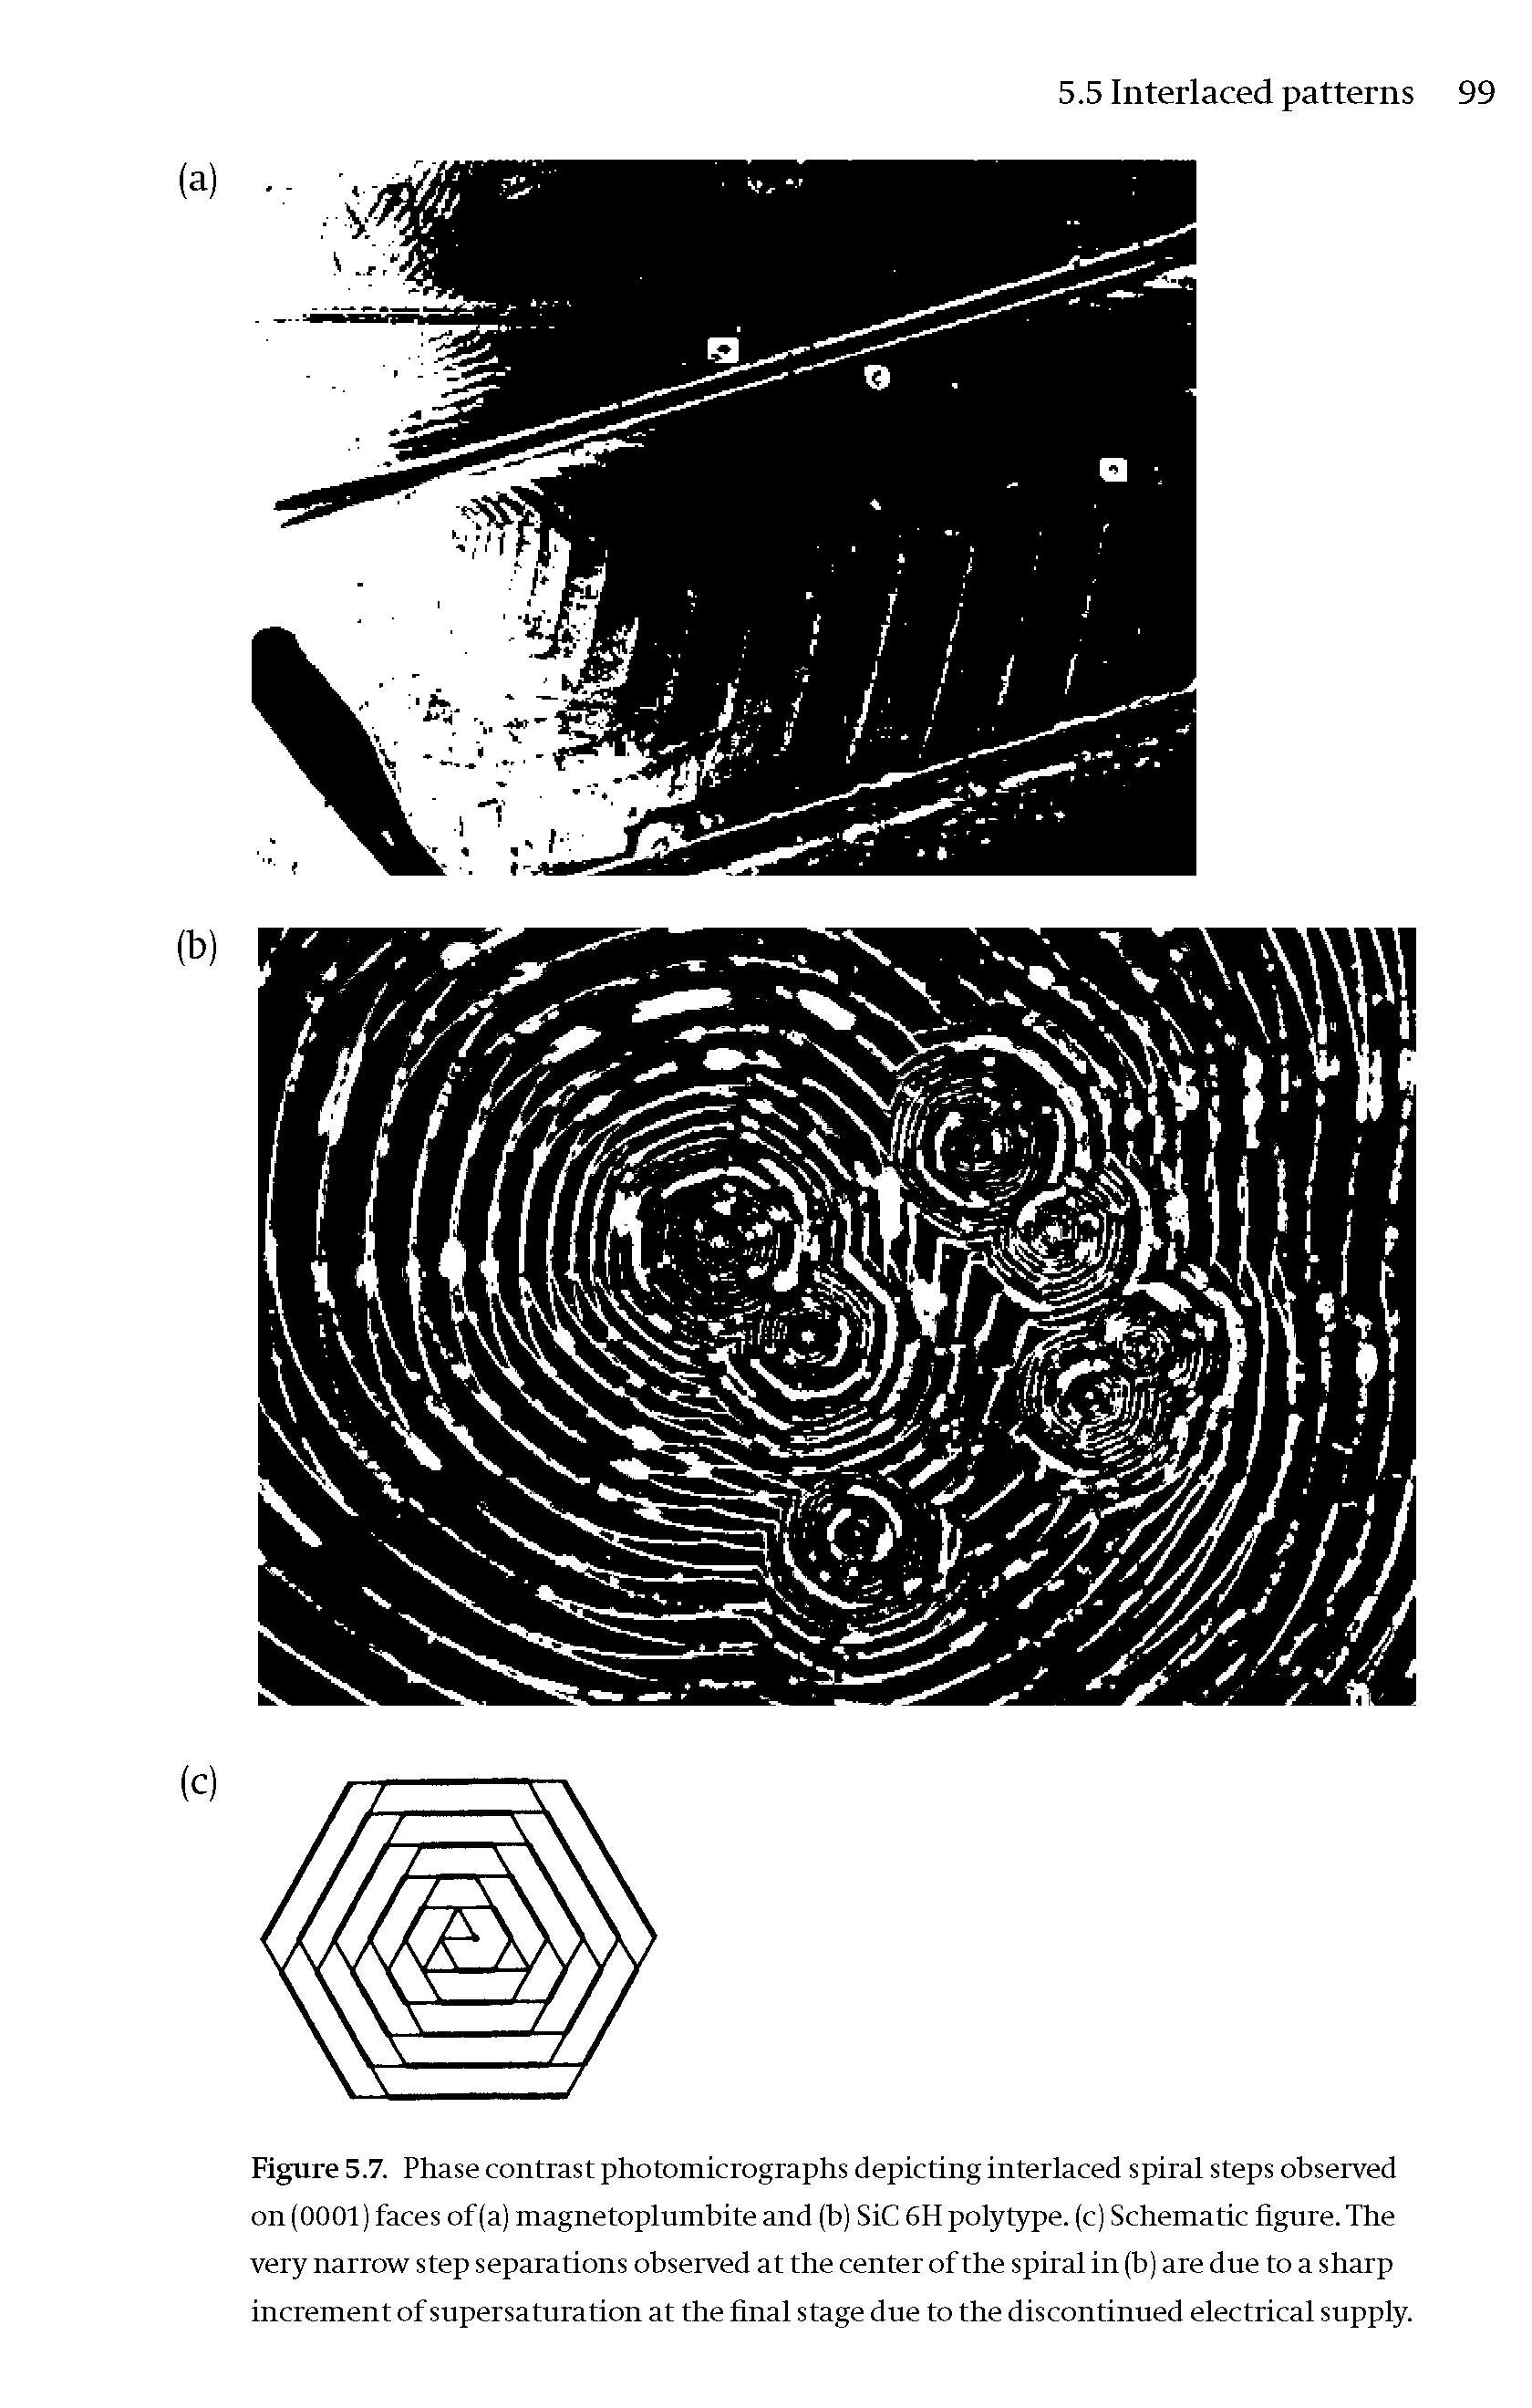 Figure 5.7. Phase contrast photomicrographs depicting interlaced spiral steps observed on (0001) faces of (a) magnetoplumbite and (b) SiC 6H polytype, (c) Schematic figure. The very narrow step separations observed at the center of the spiral in (b) are due to a sharp increment of supersaturation at the final stage due to the discontinued electrical supply.